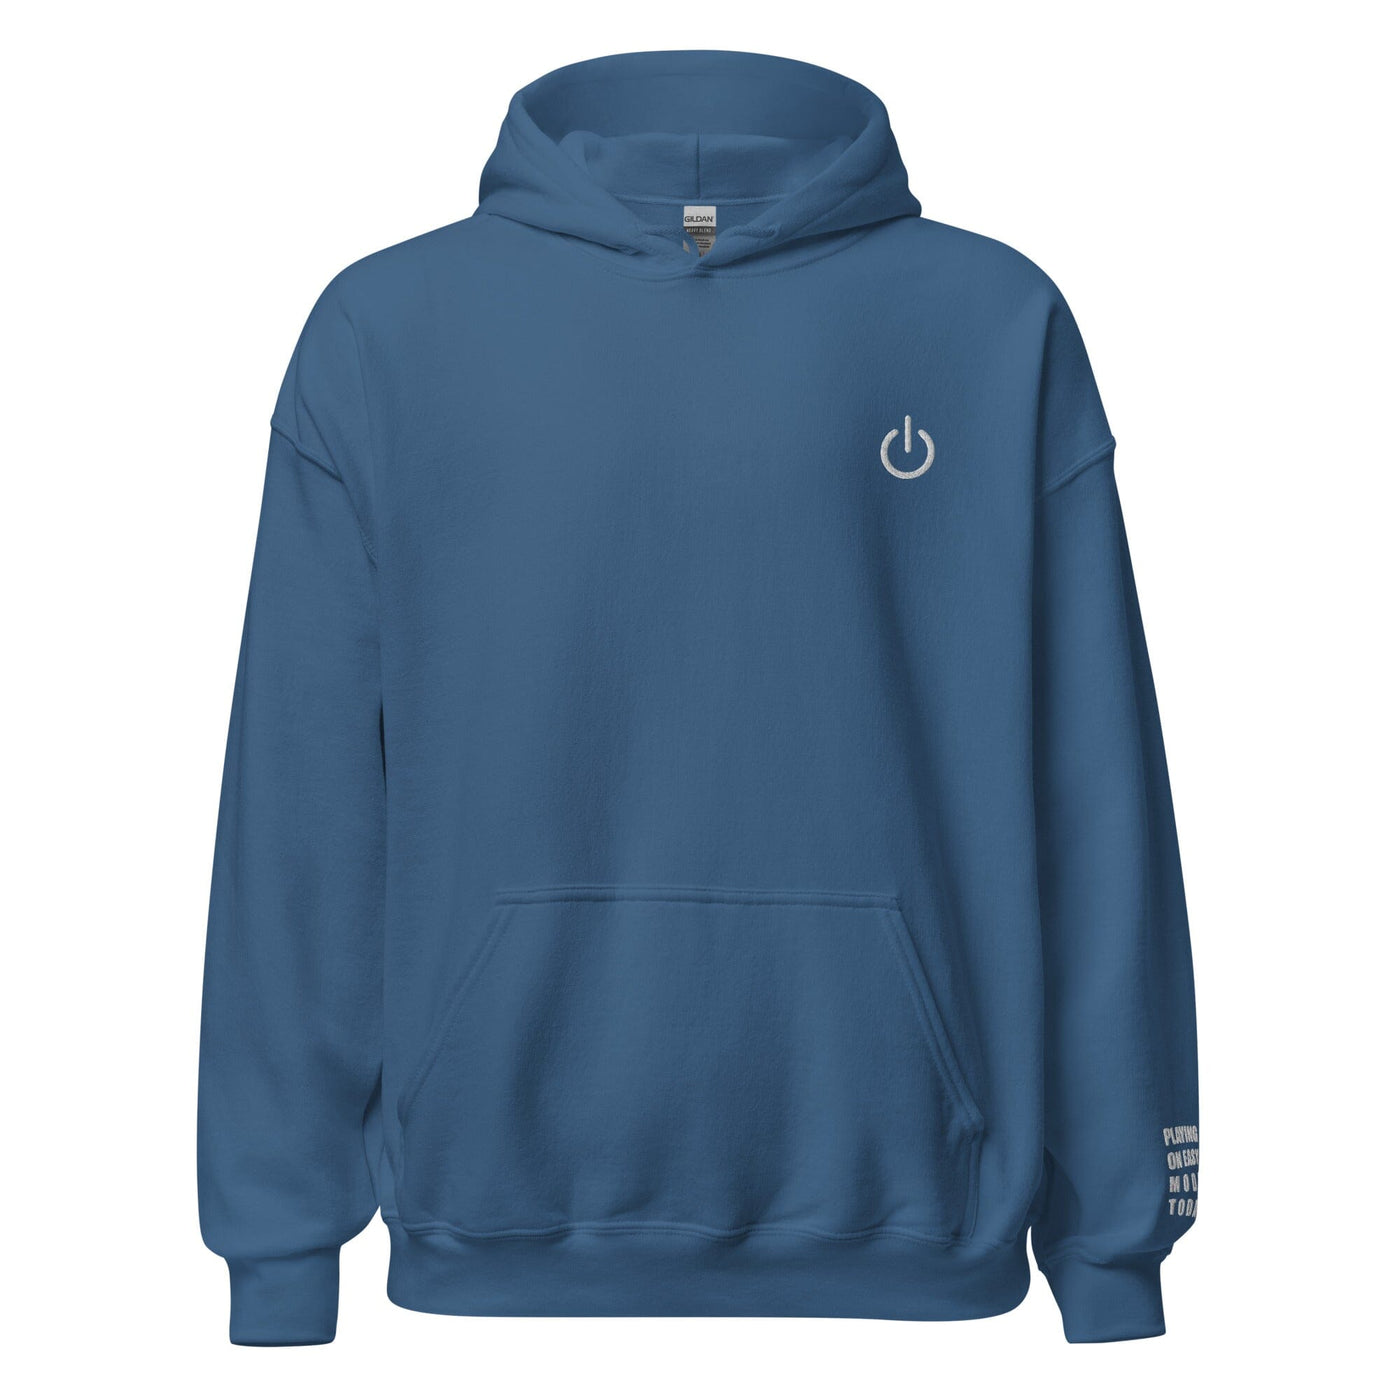 Playing on Easy Mode | Unisex Hoodie | Gamer Affirmations Threads & Thistles Inventory Indigo Blue S 